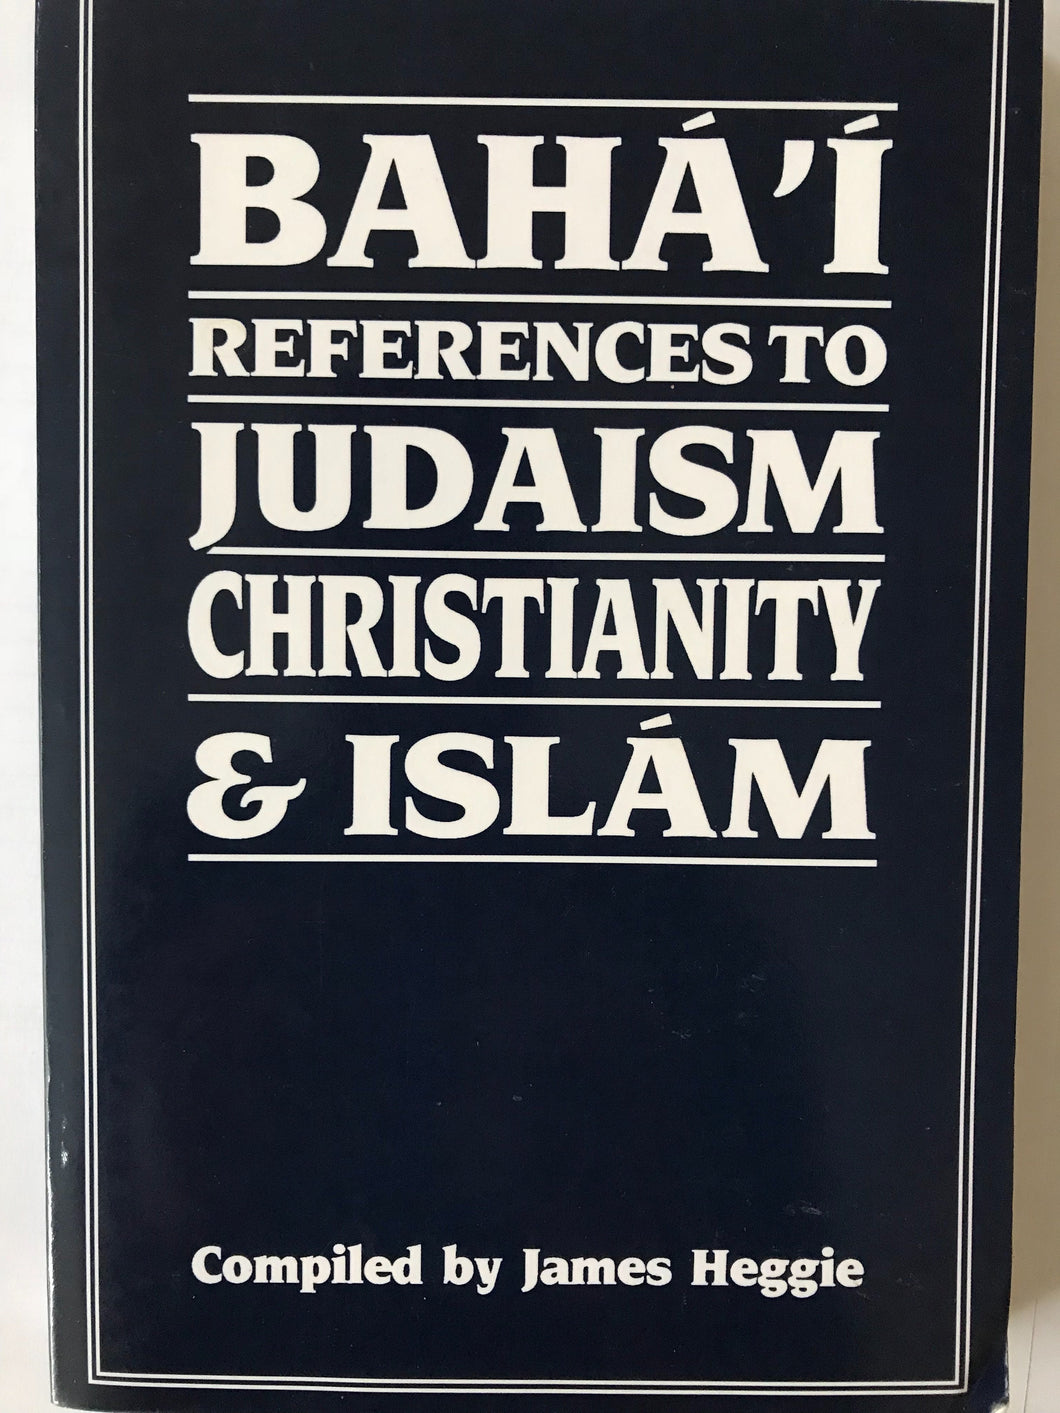 Bahai References to Judaism, Christianity and Islam